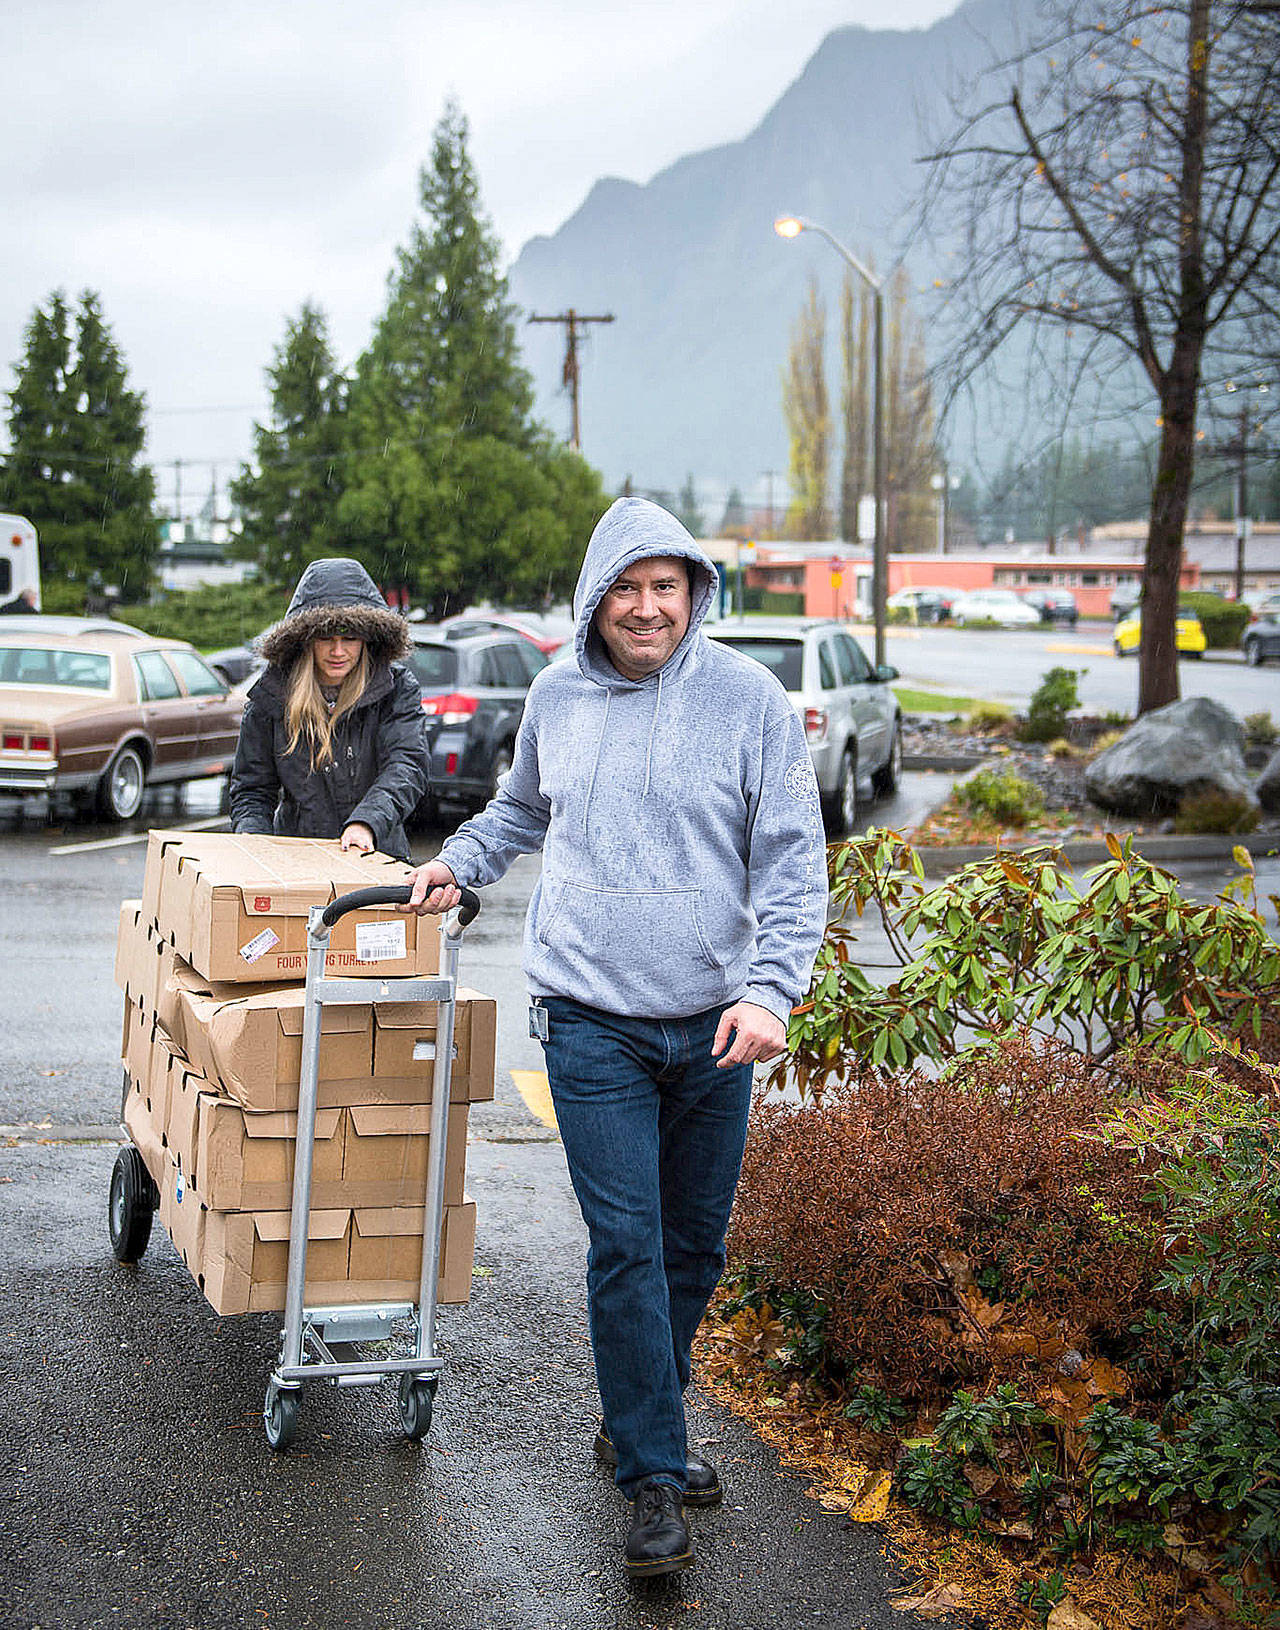 Snoqualmie Tribe donation programs run throughout the year, giving back to the local community. In November 2017, Snoqualmie Tribe volunteers collected turkeys for distribution to families and seniors in need. (Photo courtesy of the Snoqualmie Tribe)